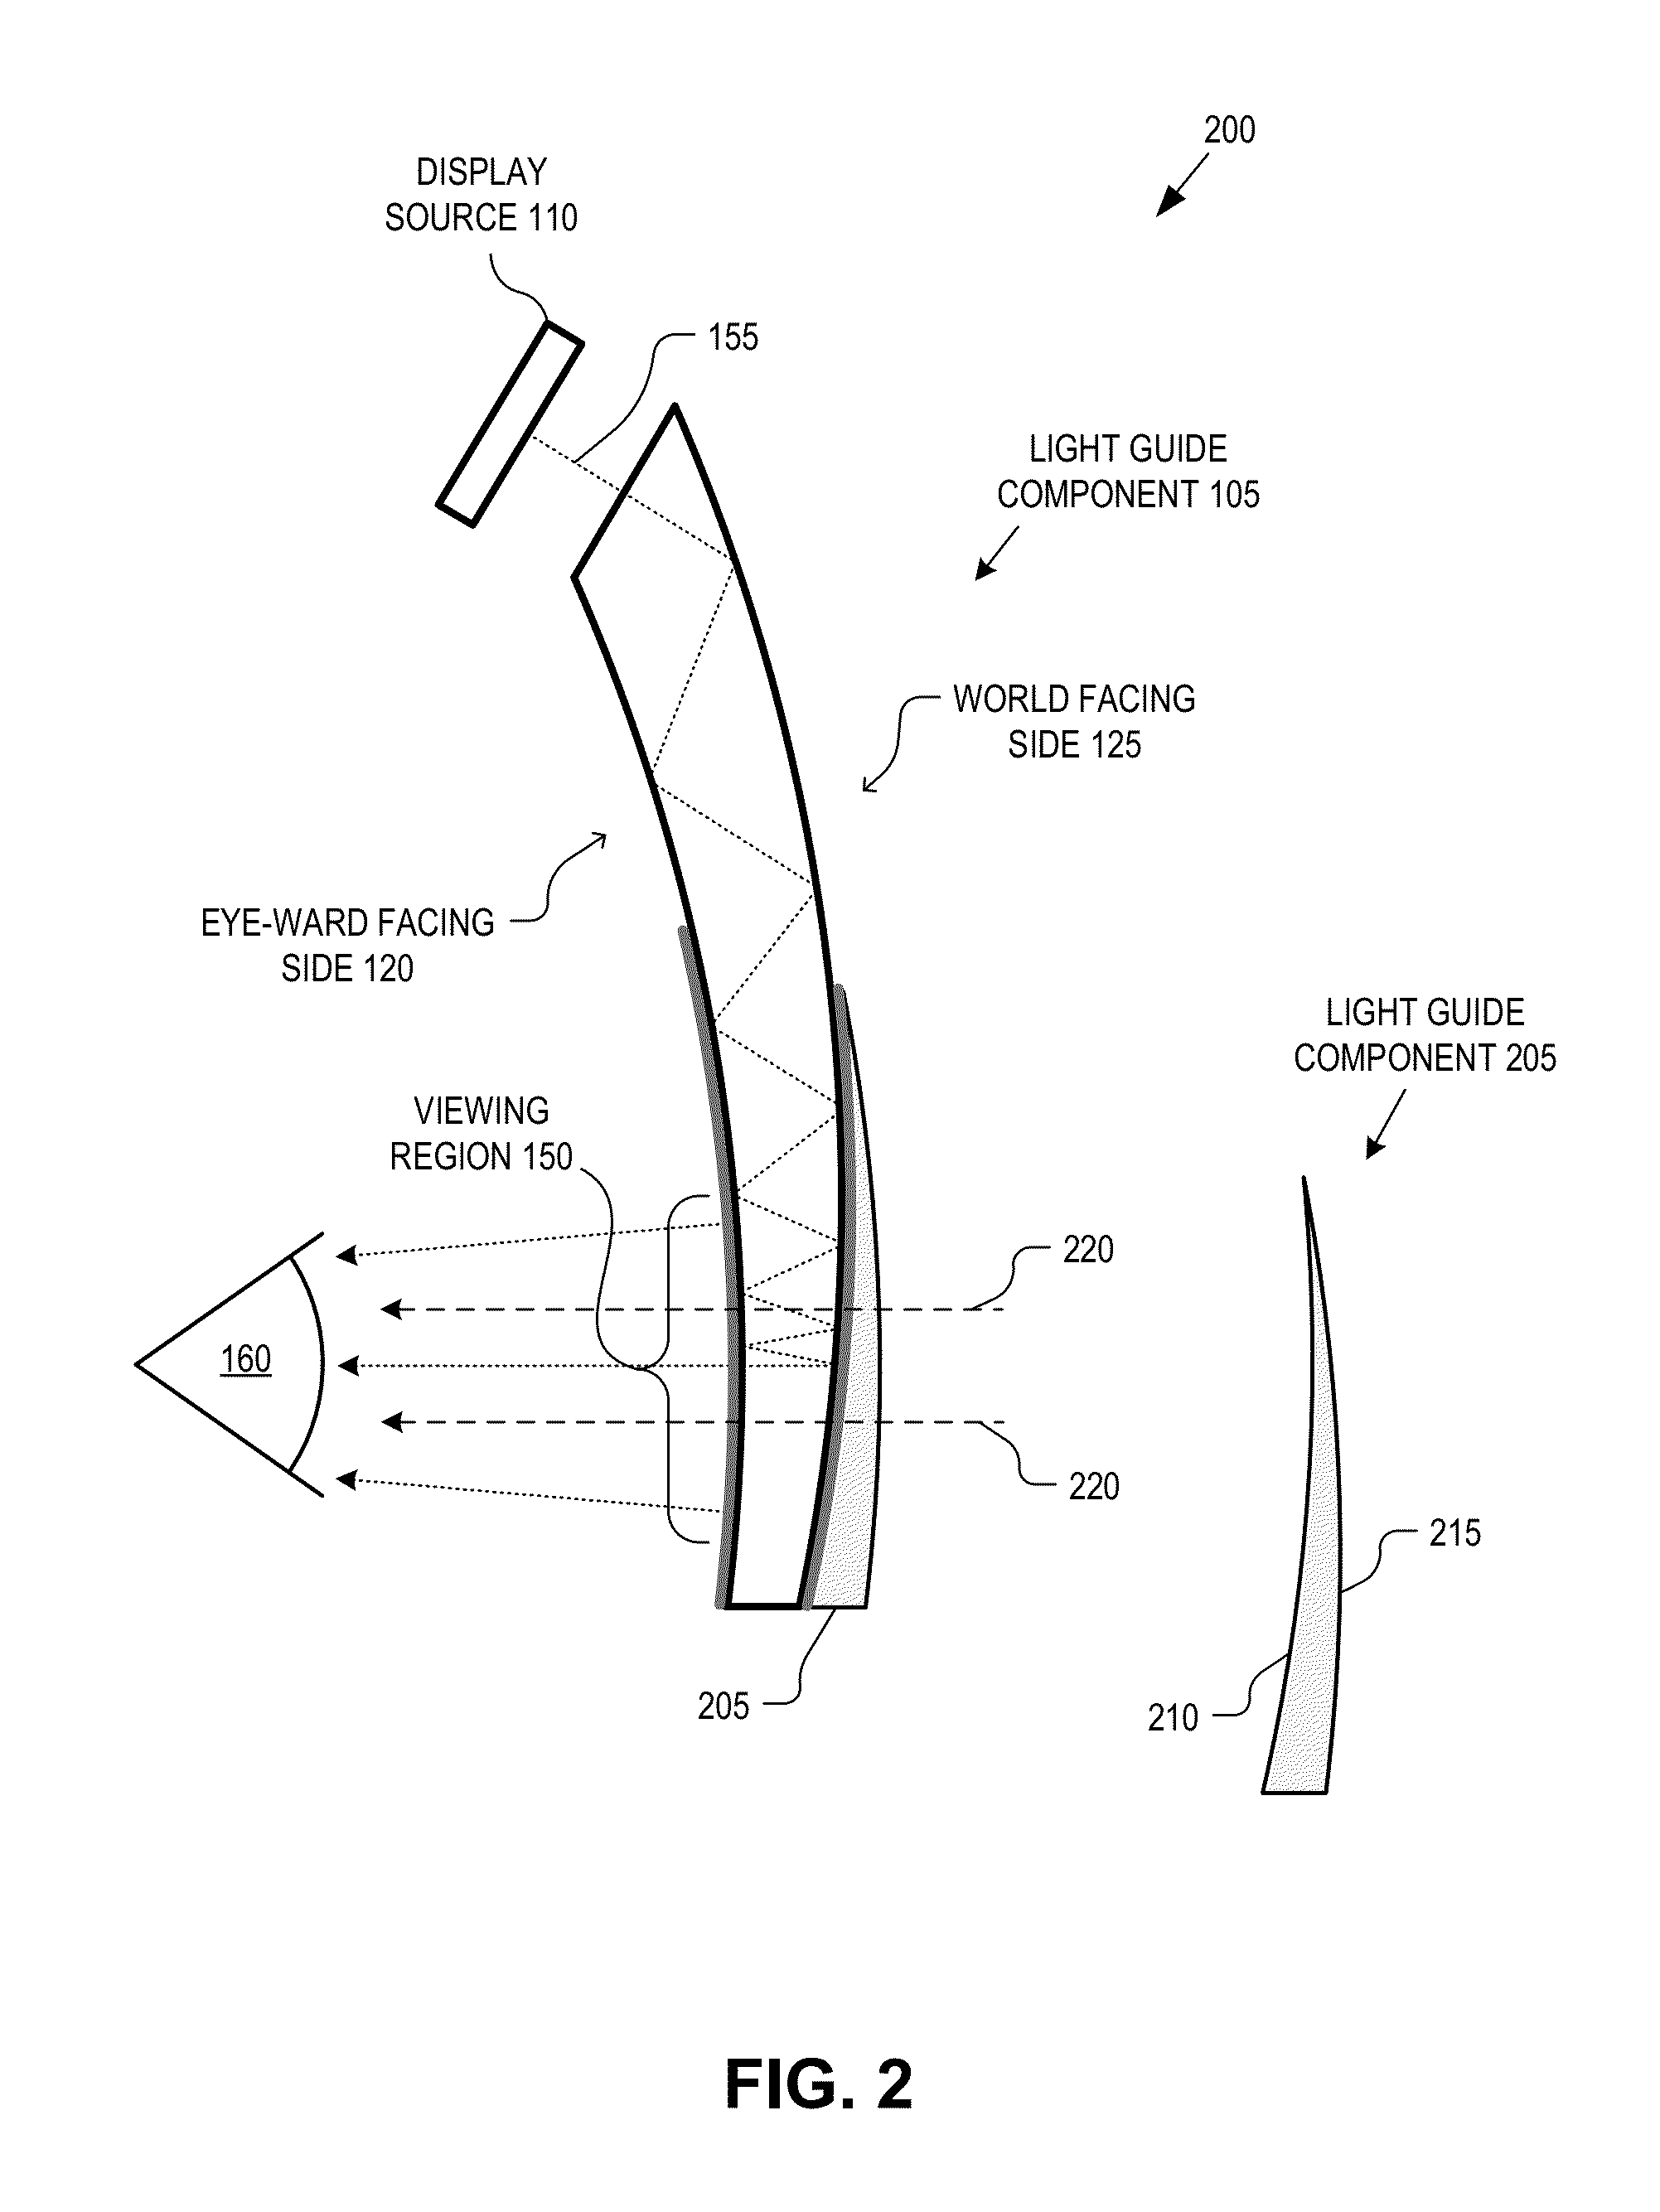 Eyepiece for head wearable display using partial and total internal reflections